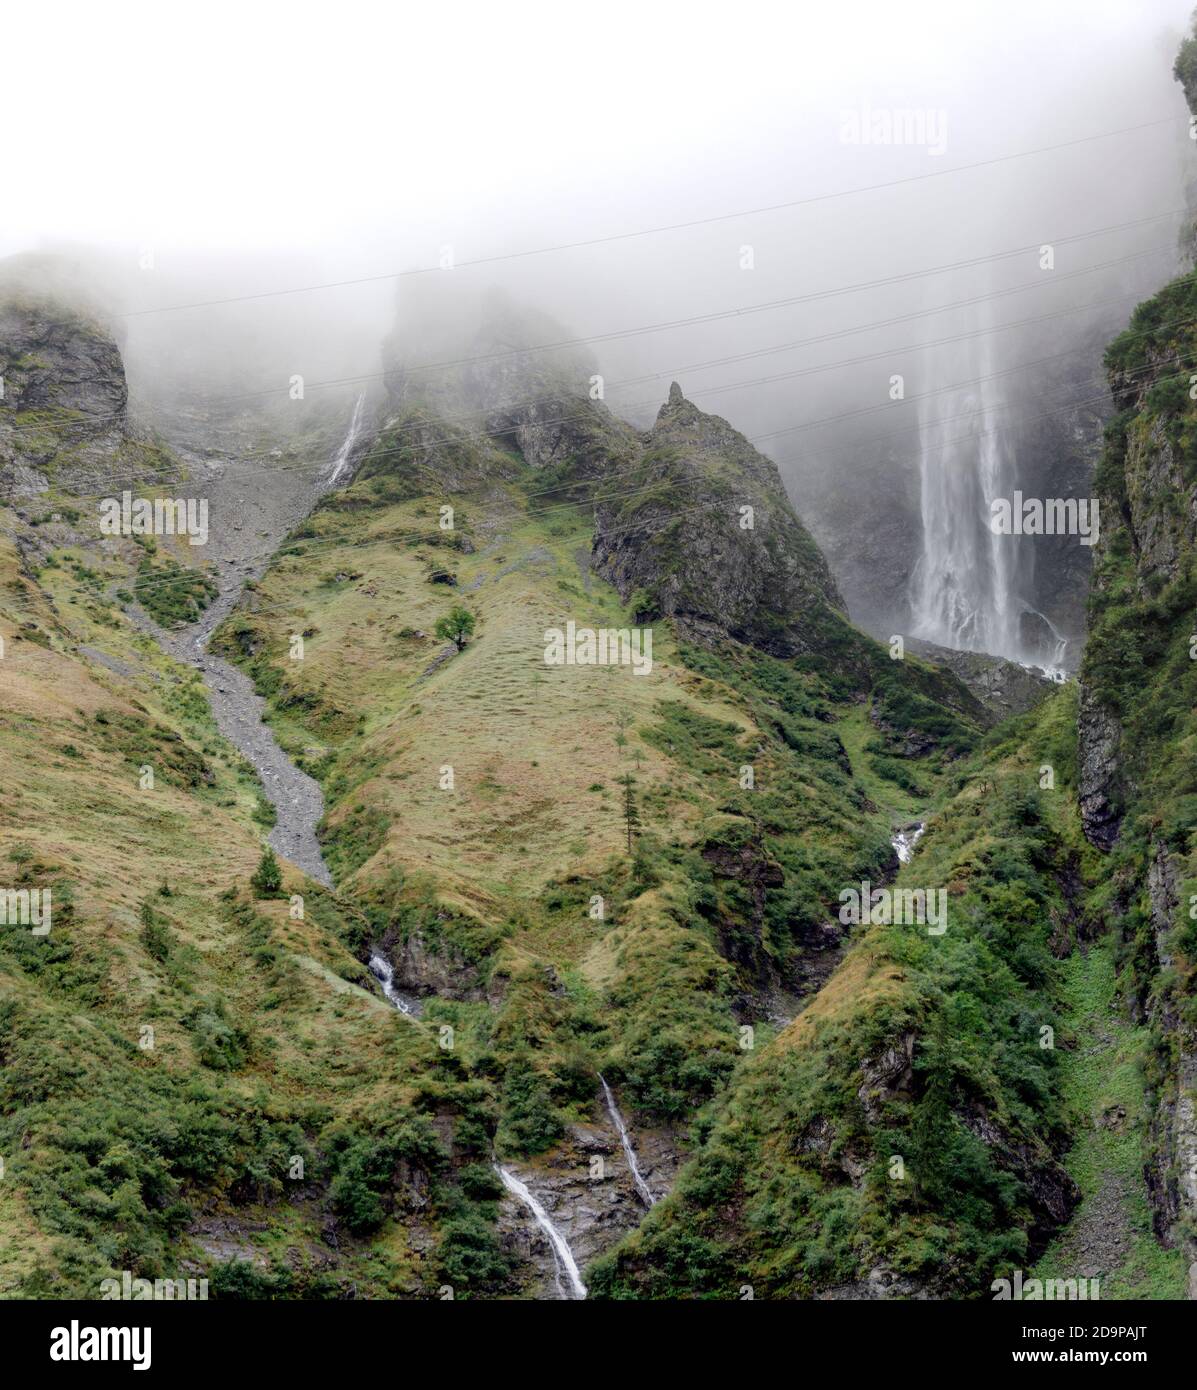 mountains of the Felber Tauern in the national park 'High Tauern' with mist water falls and electric power transmission line, Salzburg, Austria Stock Photo